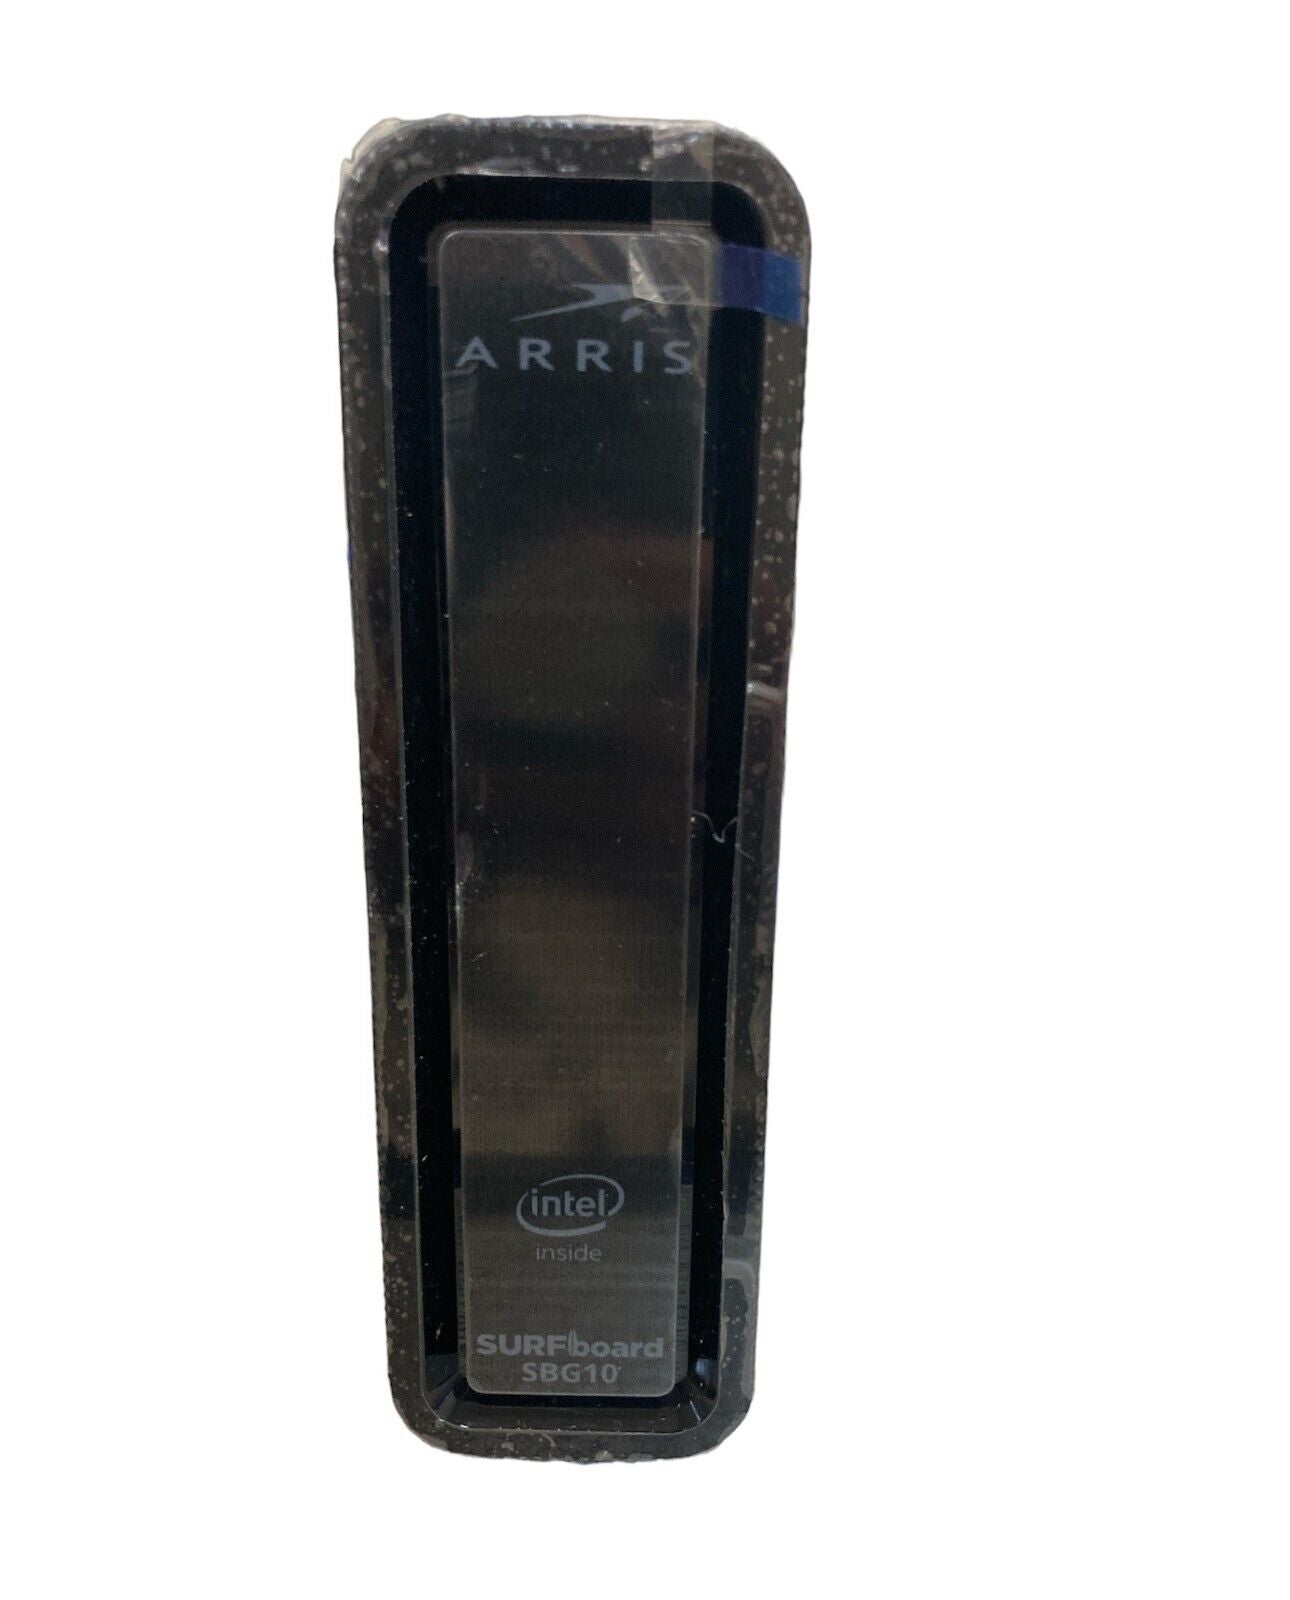 Arris Surfboard SBG10 Dual Band Router 16 X 4 DOCSIS 3.0 Cable Modem AC1600 Blk